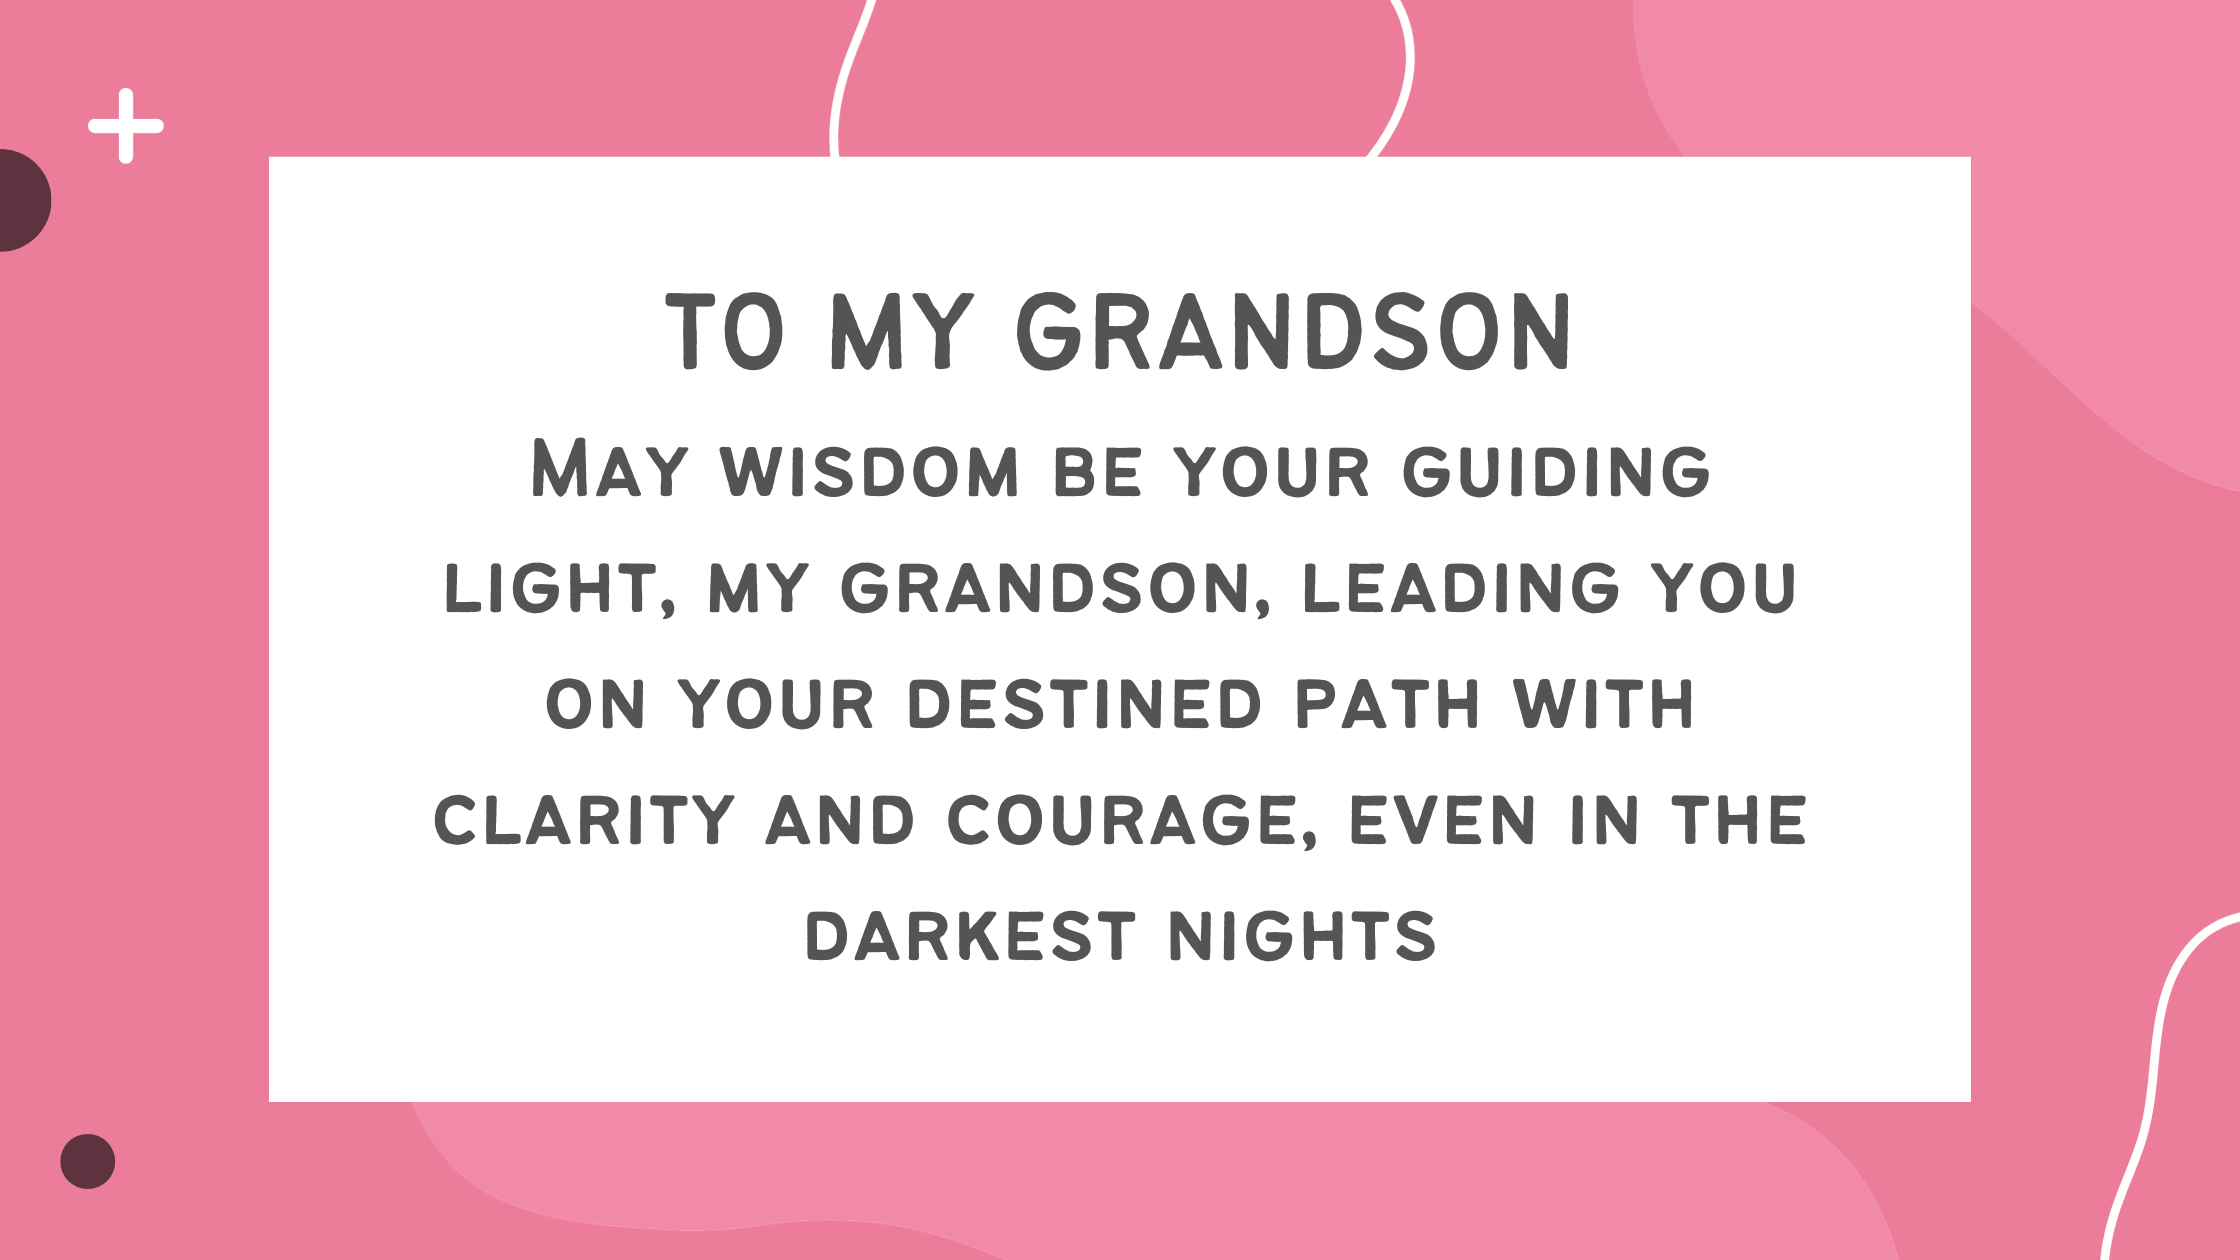 10 Heartfelt Blessing Special Words for my Grandson: A Grandparent's Hope and Love